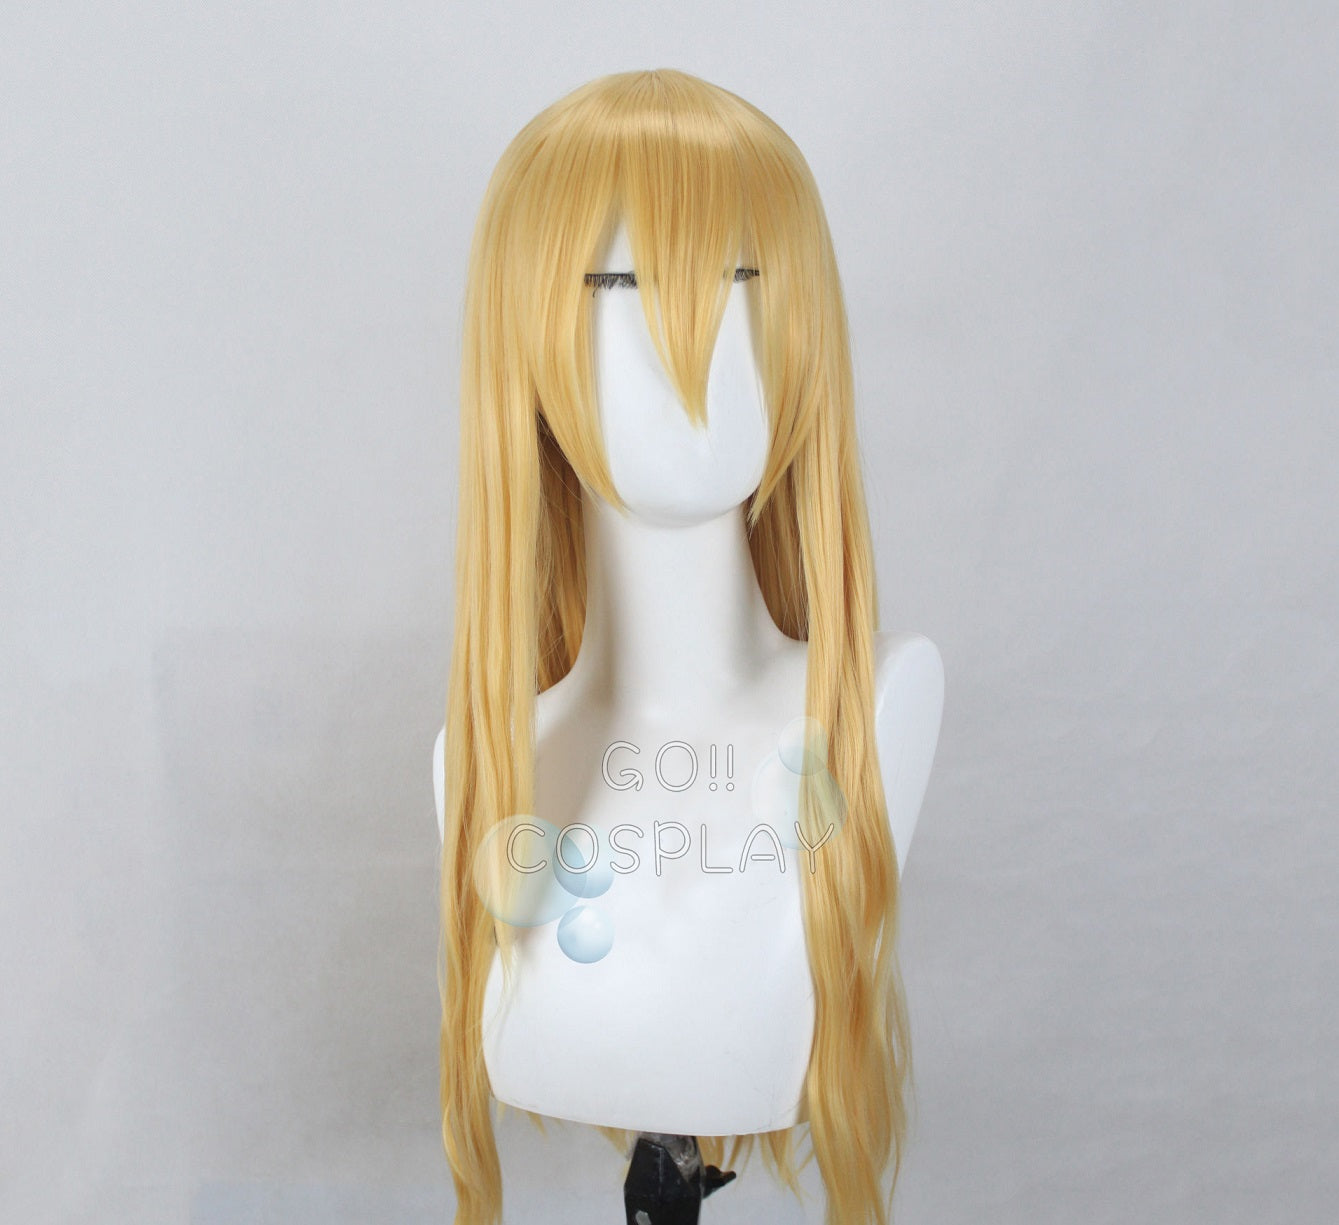 Kirschtaria Wodime Wig Fate/Grand Order: Cosmos in the Lostbelt Cosplay